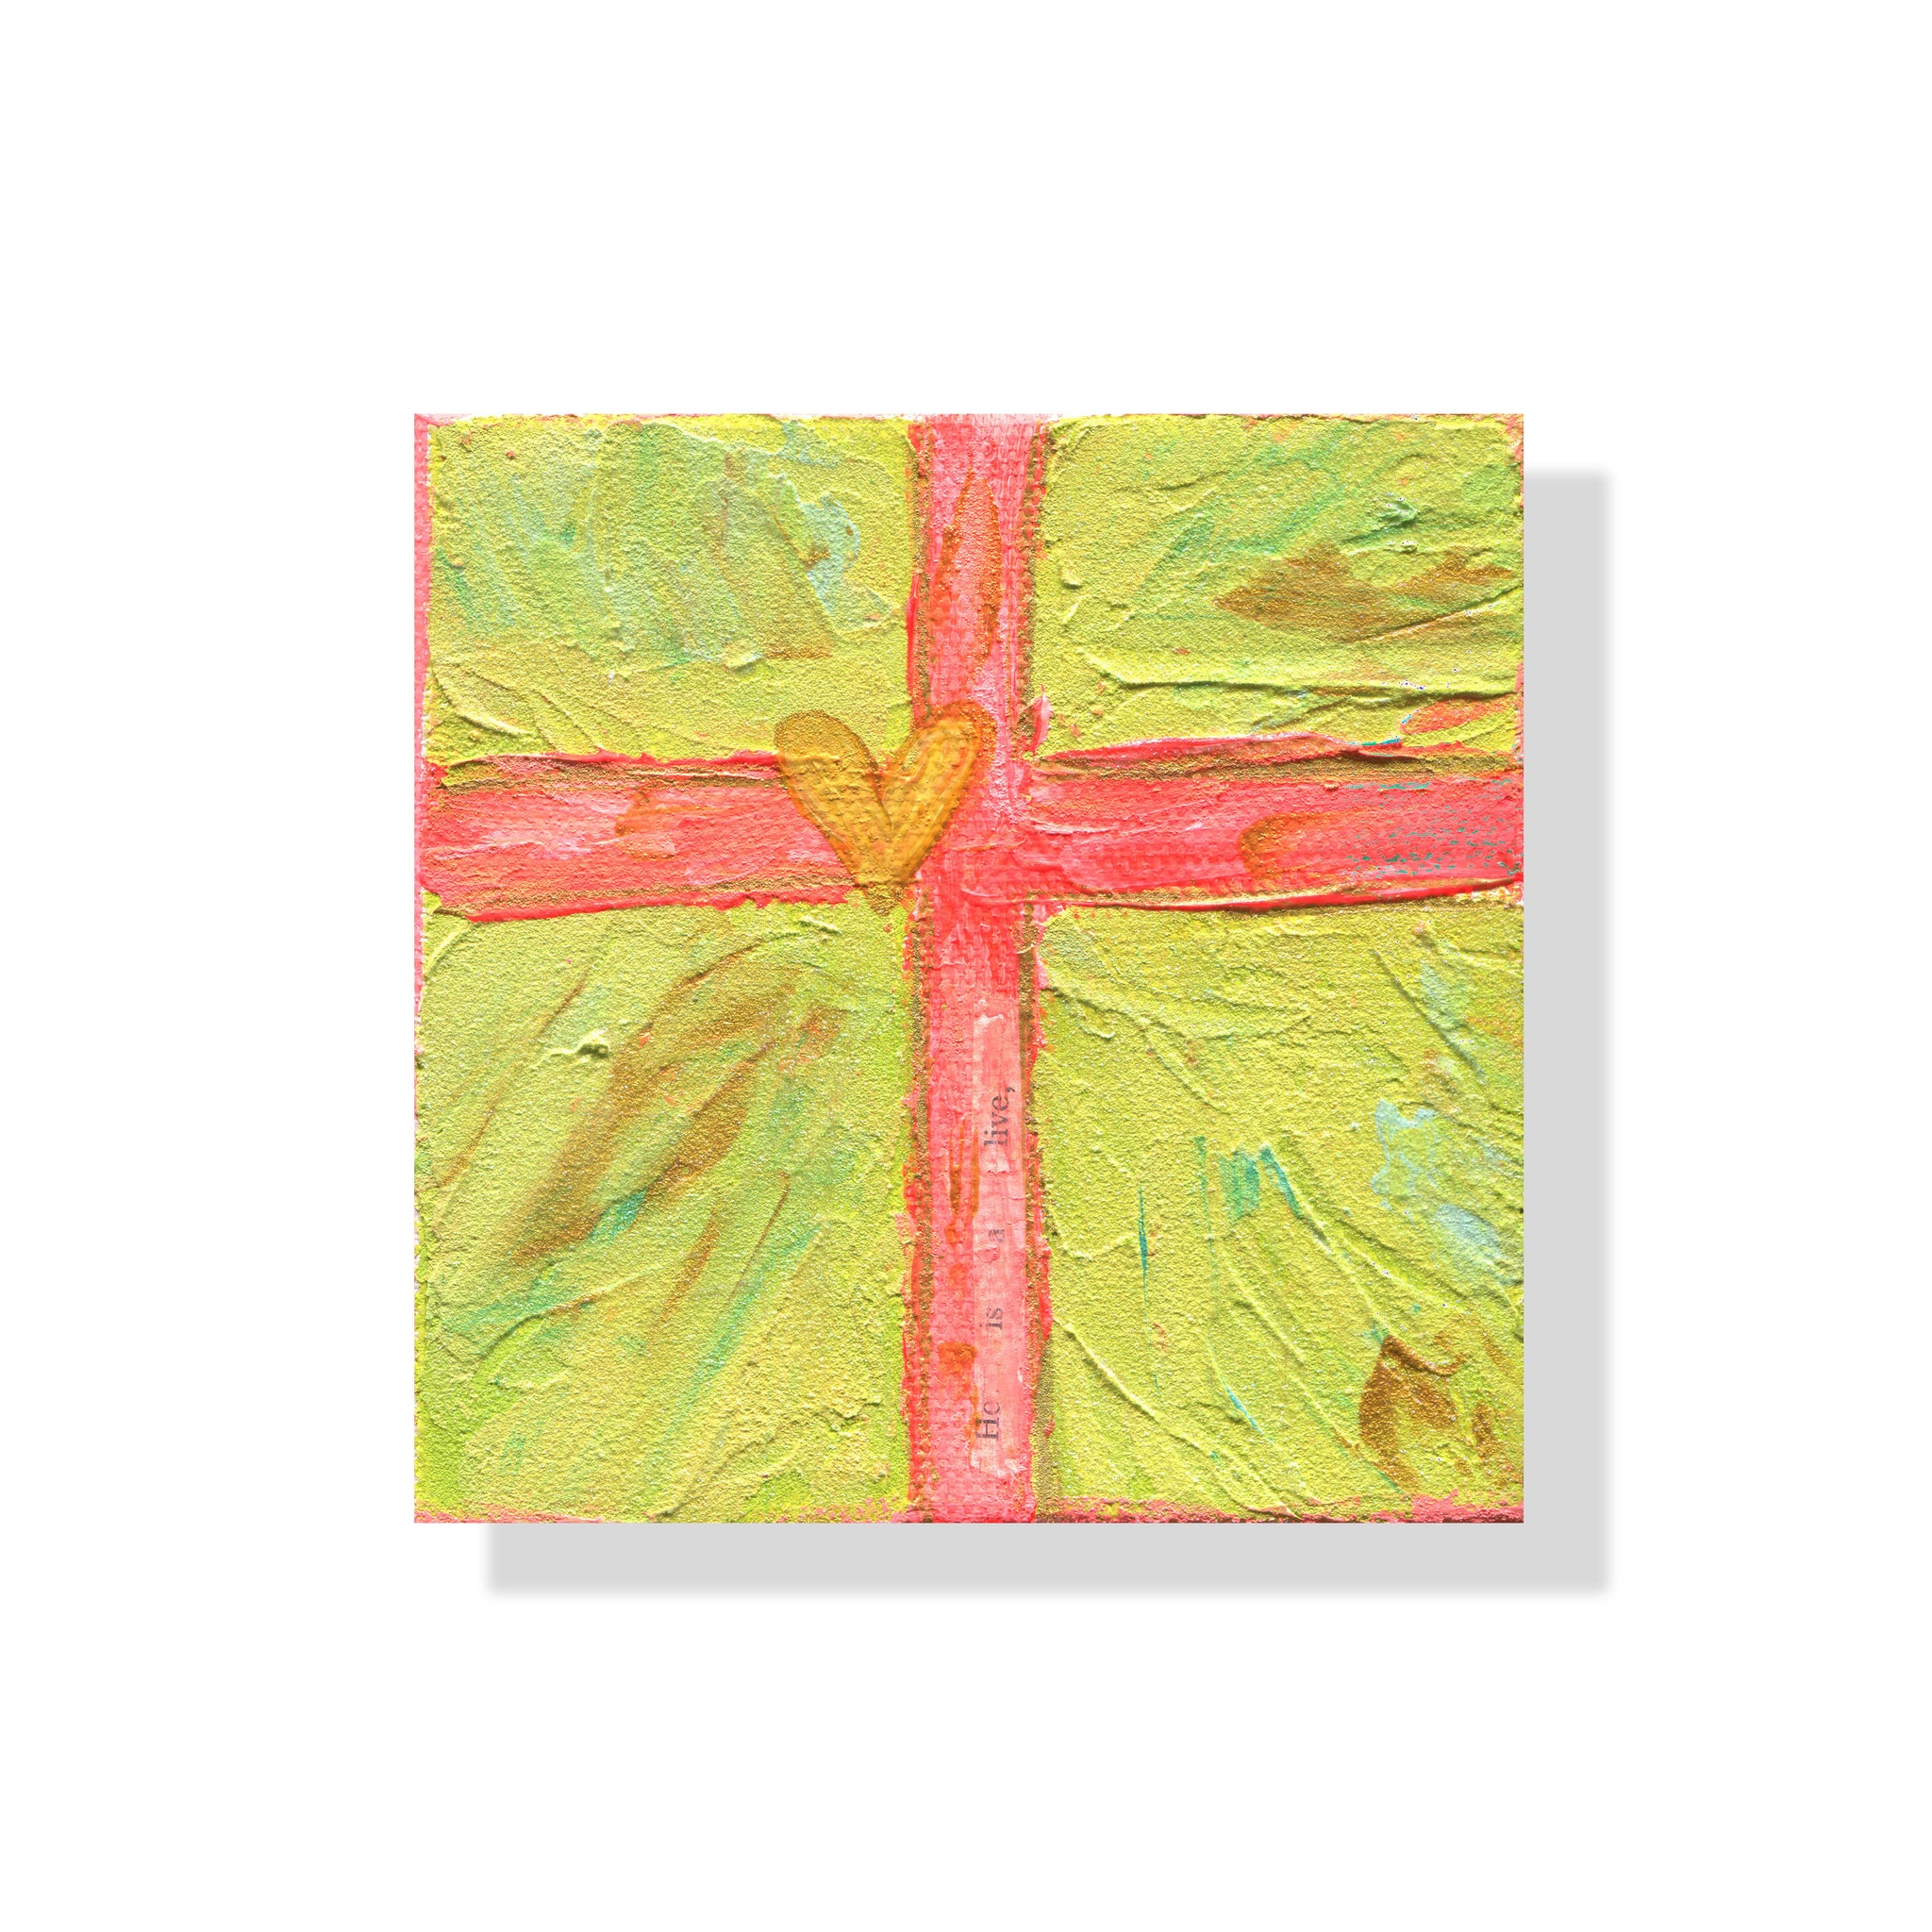 Pink and Green Cross "He is Alive" 4x4 inches: Cross Collection